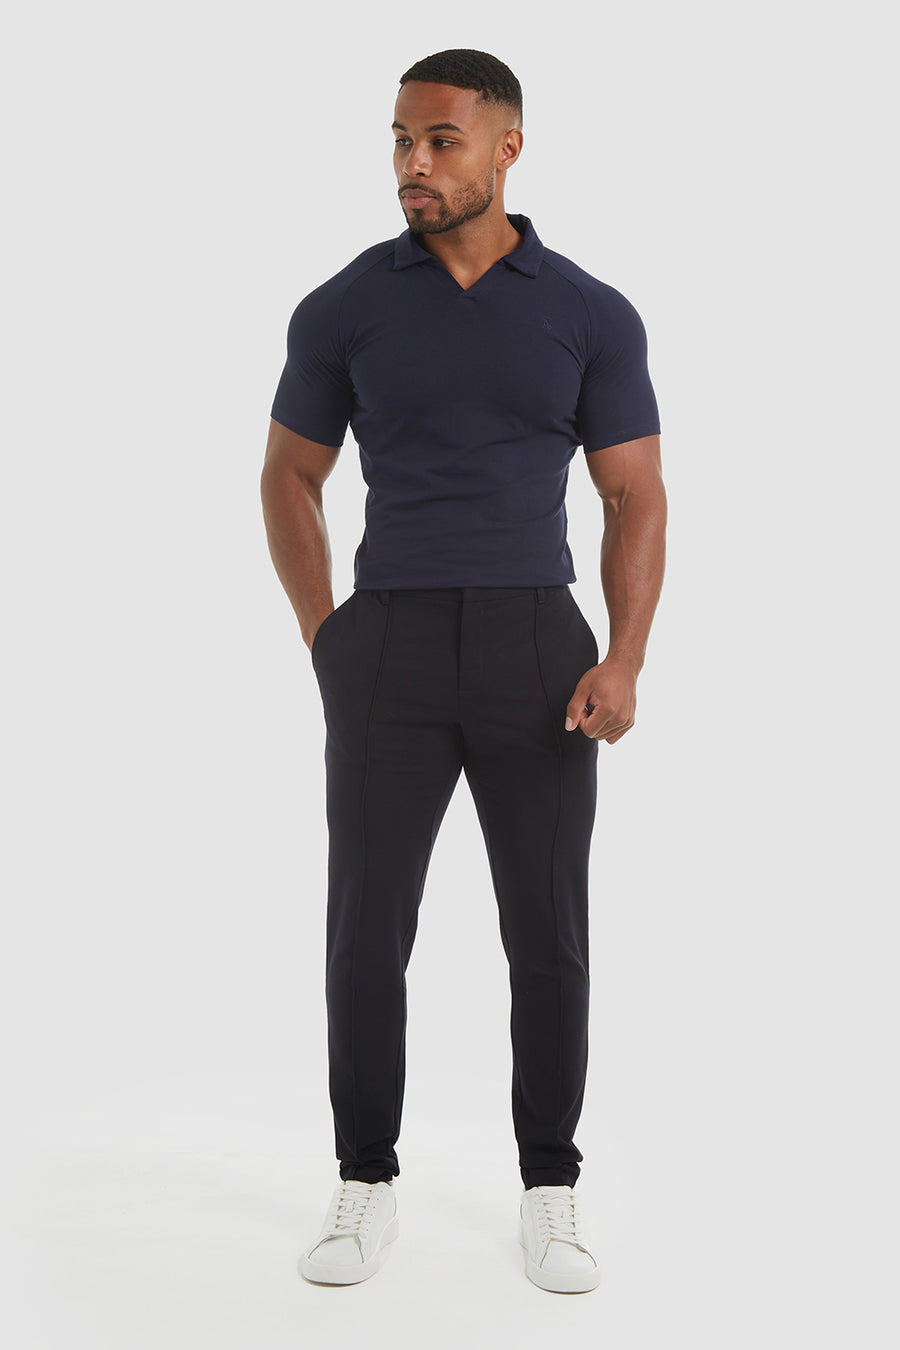 Stitched Crease Pants in Navy - TAILORED ATHLETE - USA